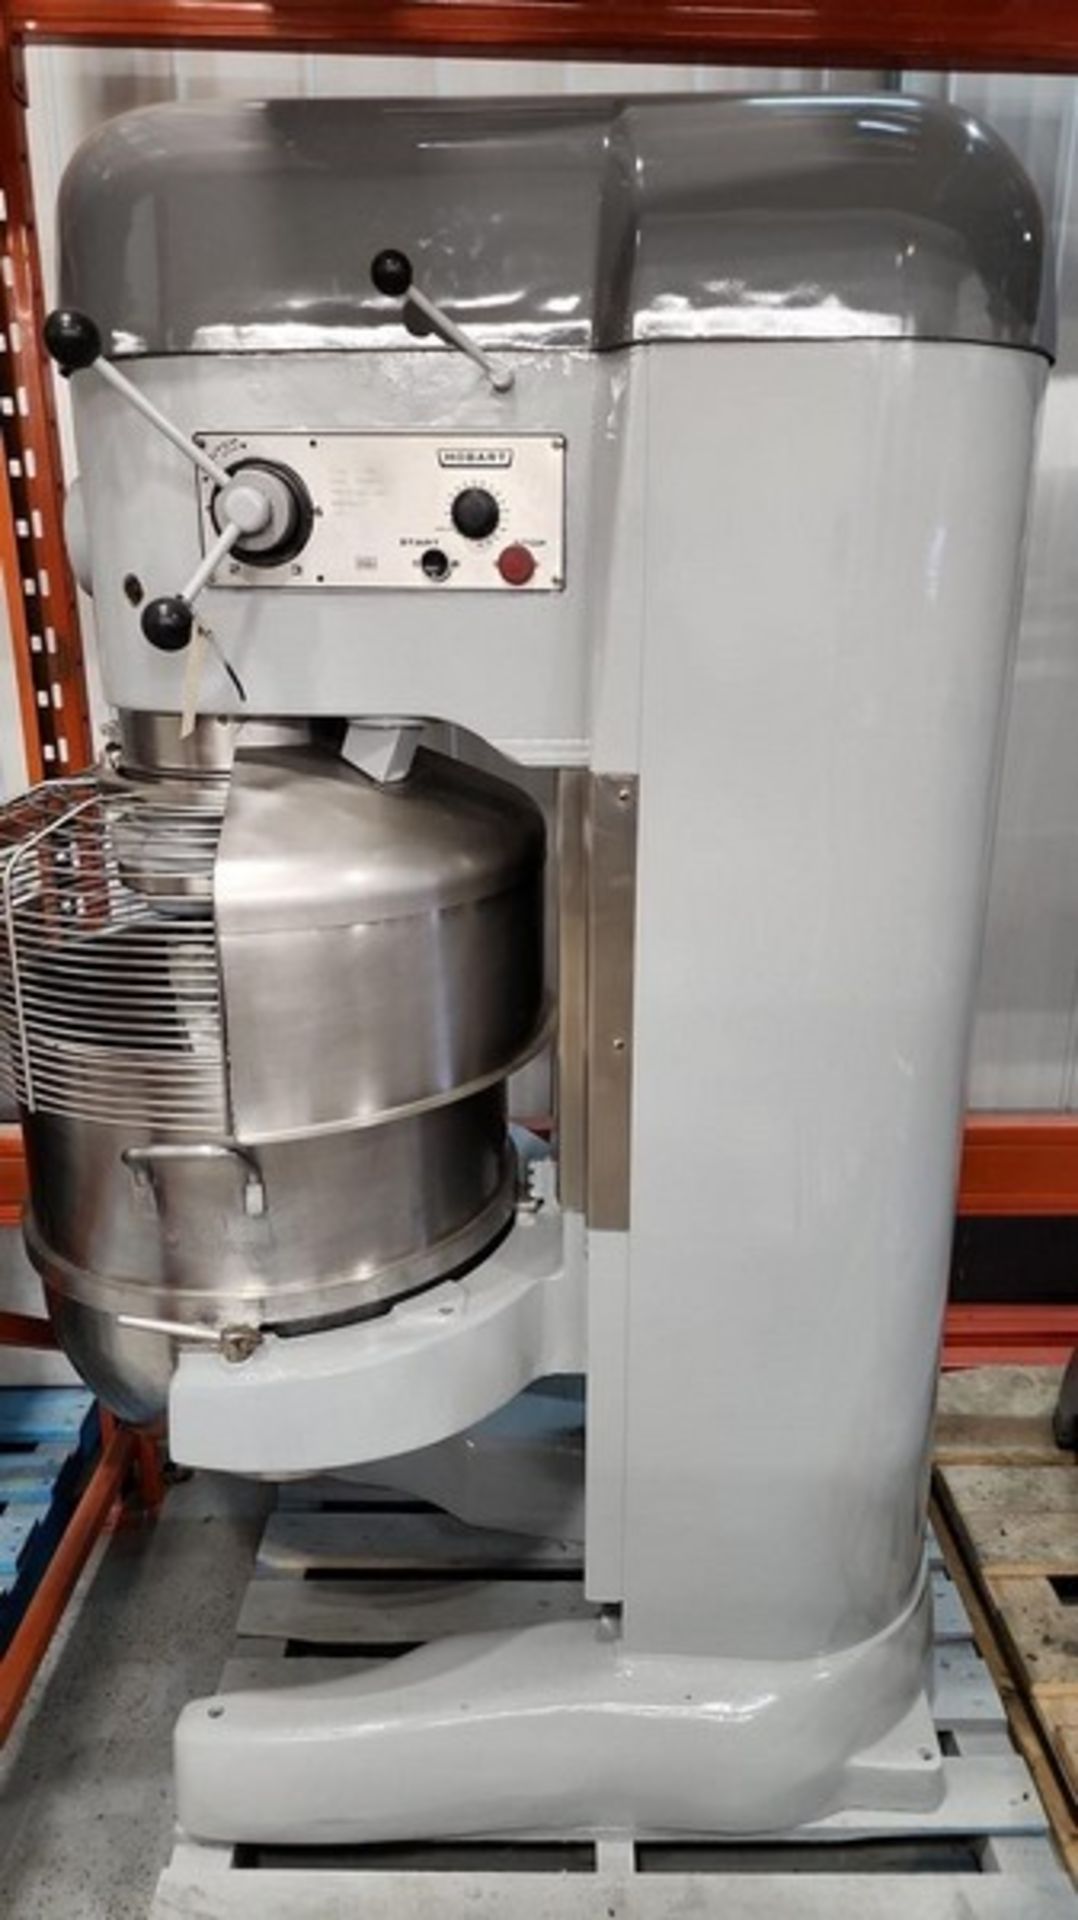 HOBART MIXER MODEL V-1401 HOBART Mixer Model V1401 5hp /208volts/ 60hz 14 amps. Comes with 140qt - Image 3 of 6